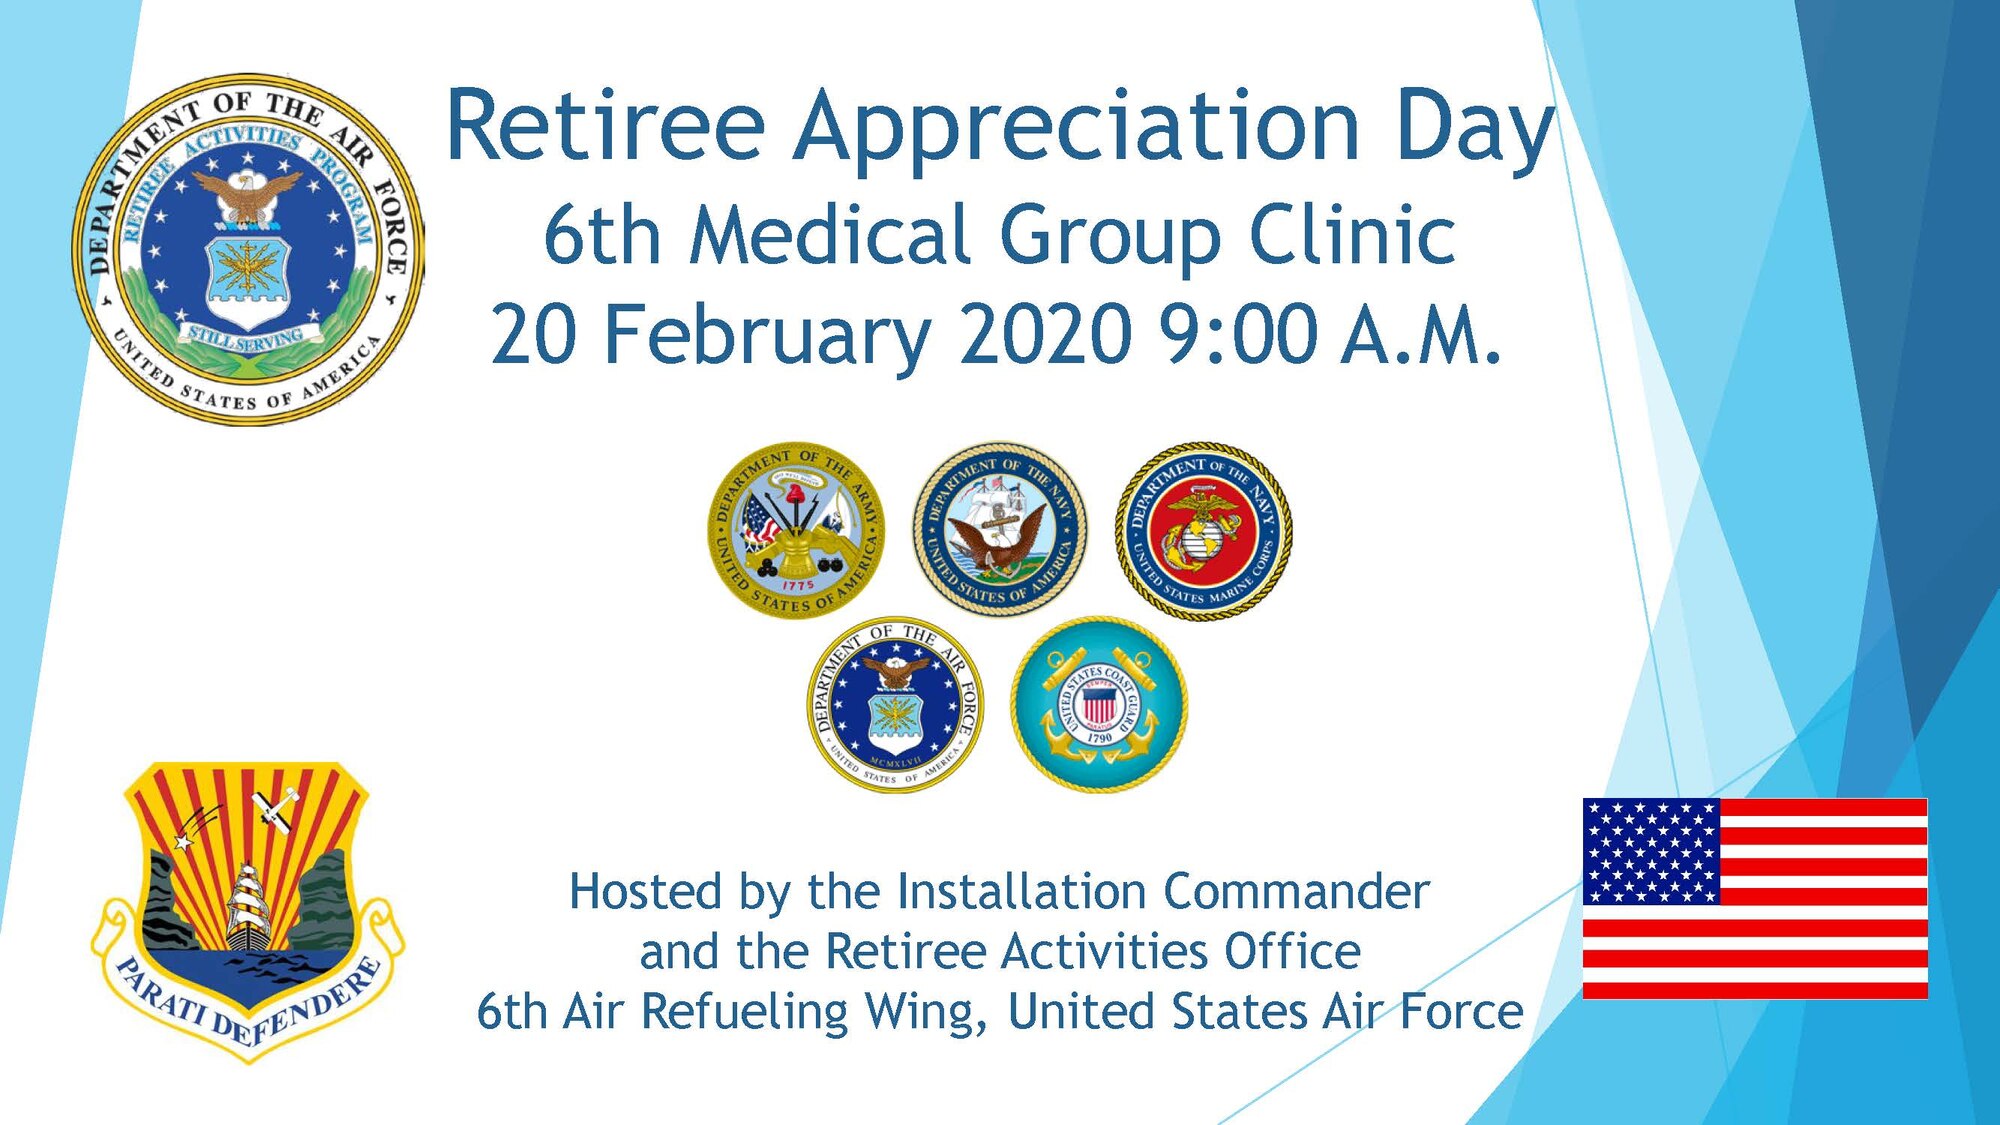 Base officials will host a Military Retiree Appreciation Day event for military retirees, spouses and dependent survivors of all ranks and services on Feb. 20 from 9 a.m. to 3 p.m. at the 6th Medical Group Clinic here. Hosted by the installation commander and the MacDill Retiree Activities Office, this year's event will include a mini-health fair with immunizations, veterans’ service organizations, renewal of identification cards, legal assistance and lunch at the dining facility. There will be a cake cutting ceremony with the MacDill Honor Guard at the in the facility entrance at 11 a.m. (U.S. Air Force graphic)